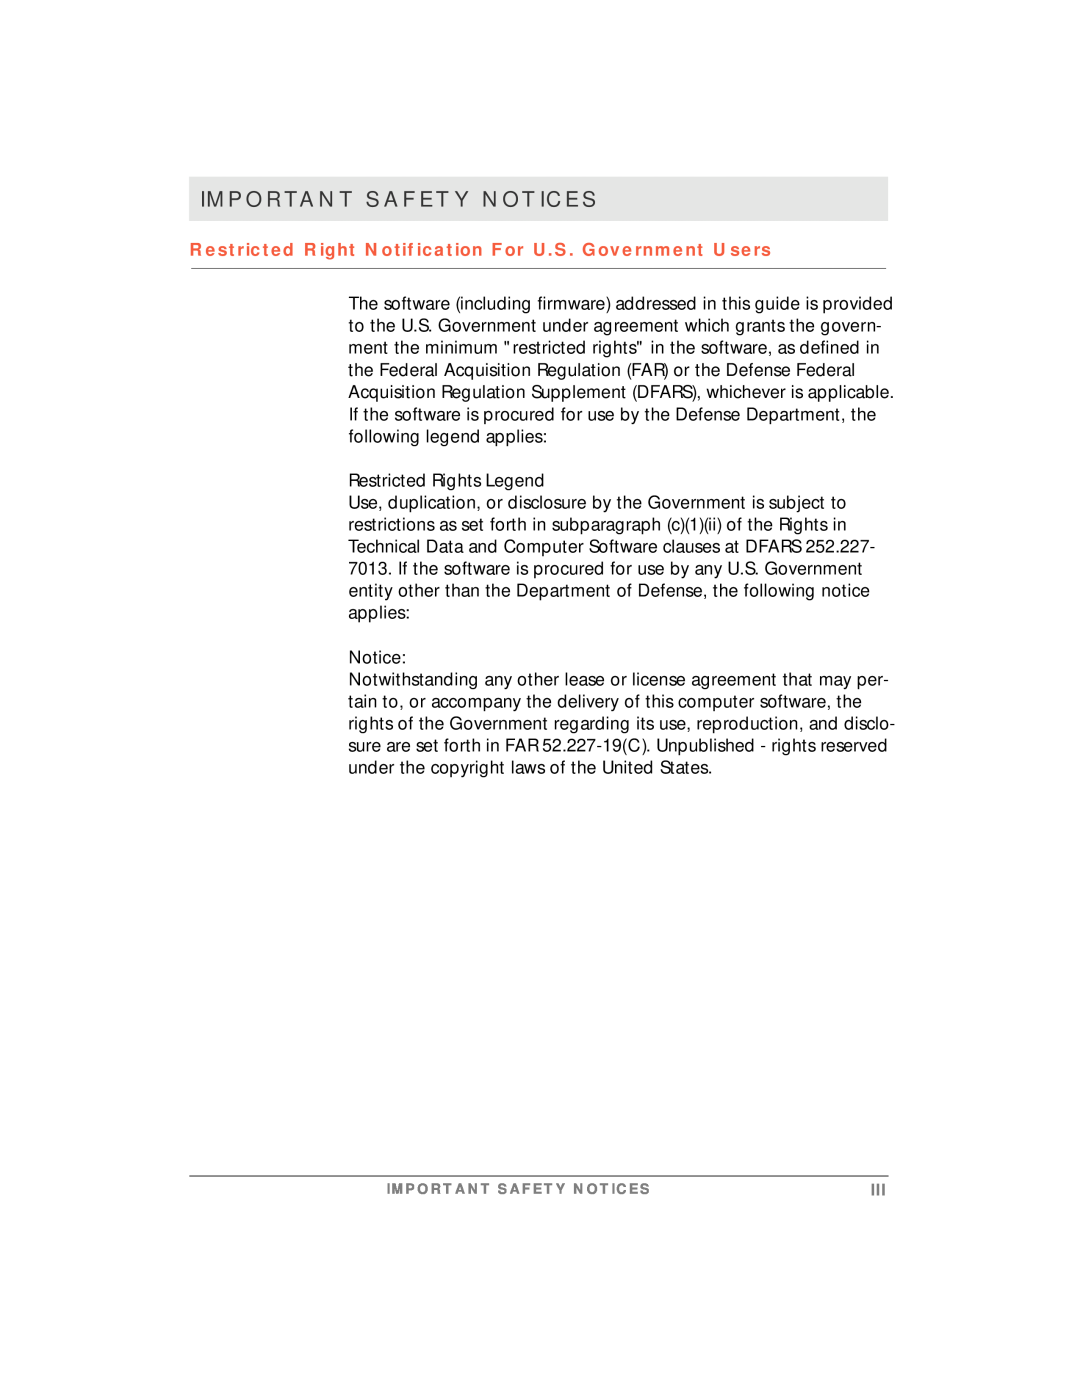 Motorola simplefi manual Important Safety Notices, Restricted Rights Legend 